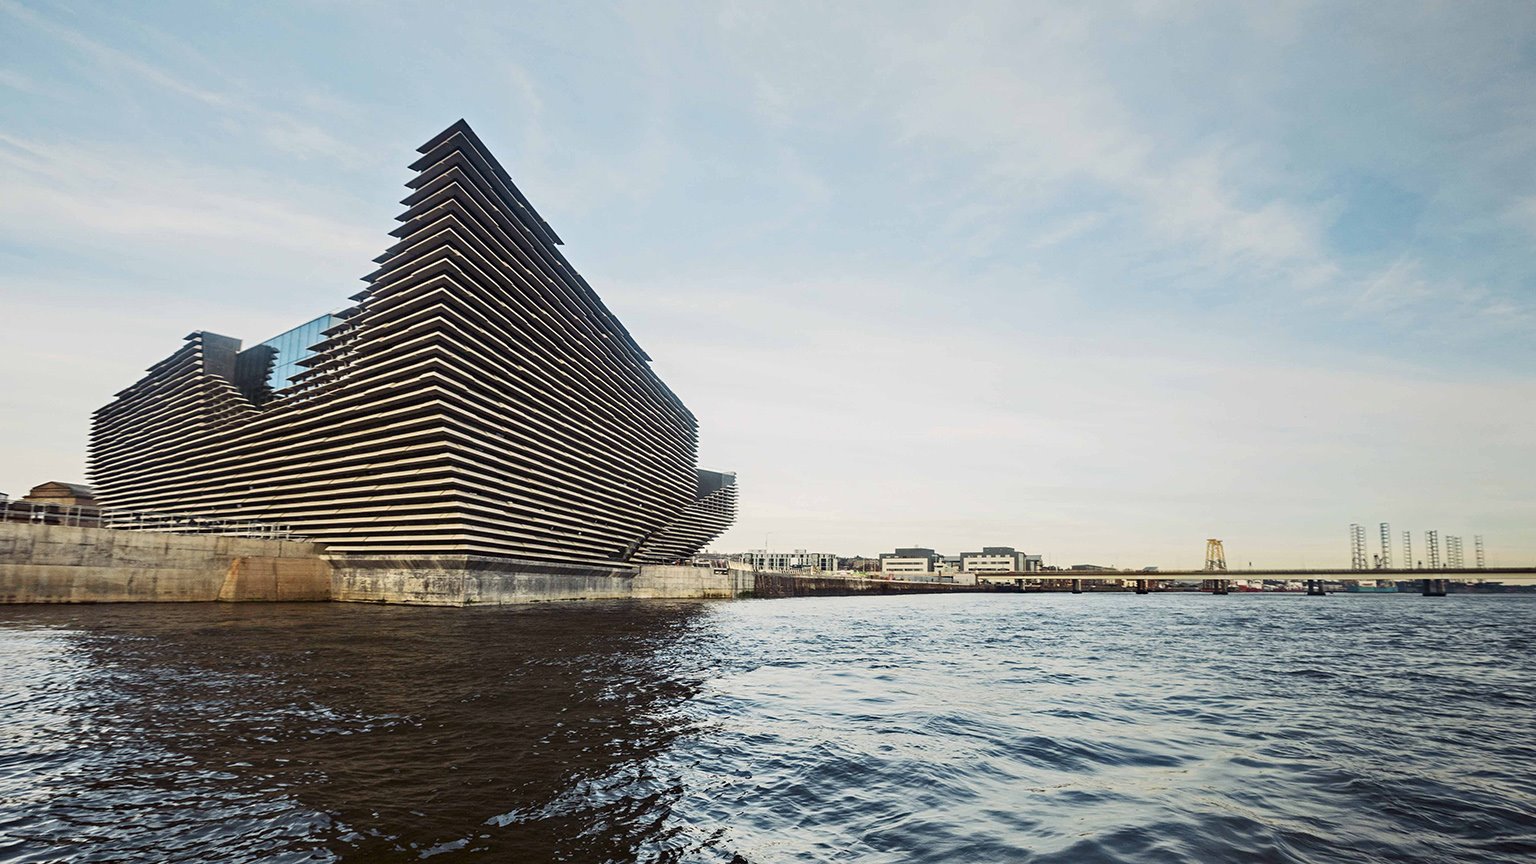 2018 V&A Museum of Design Dundee in Dundee